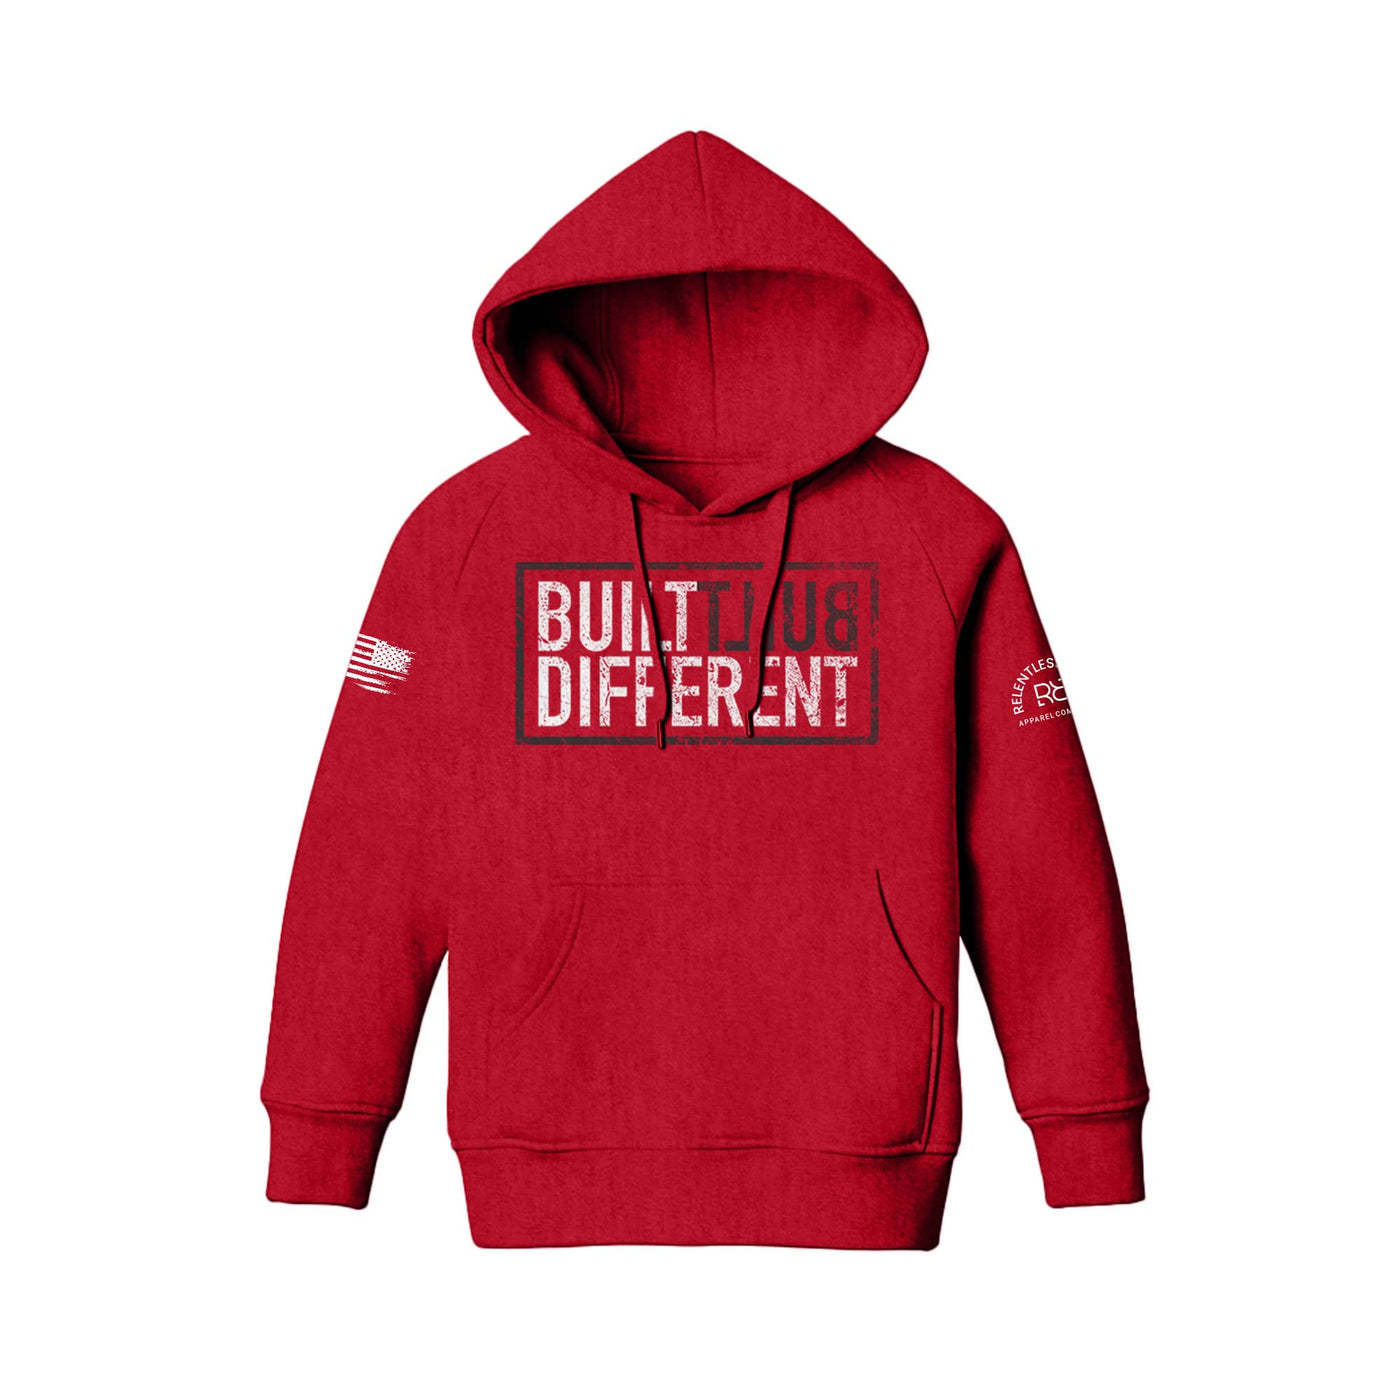 Built Different Youth front design red hoodie